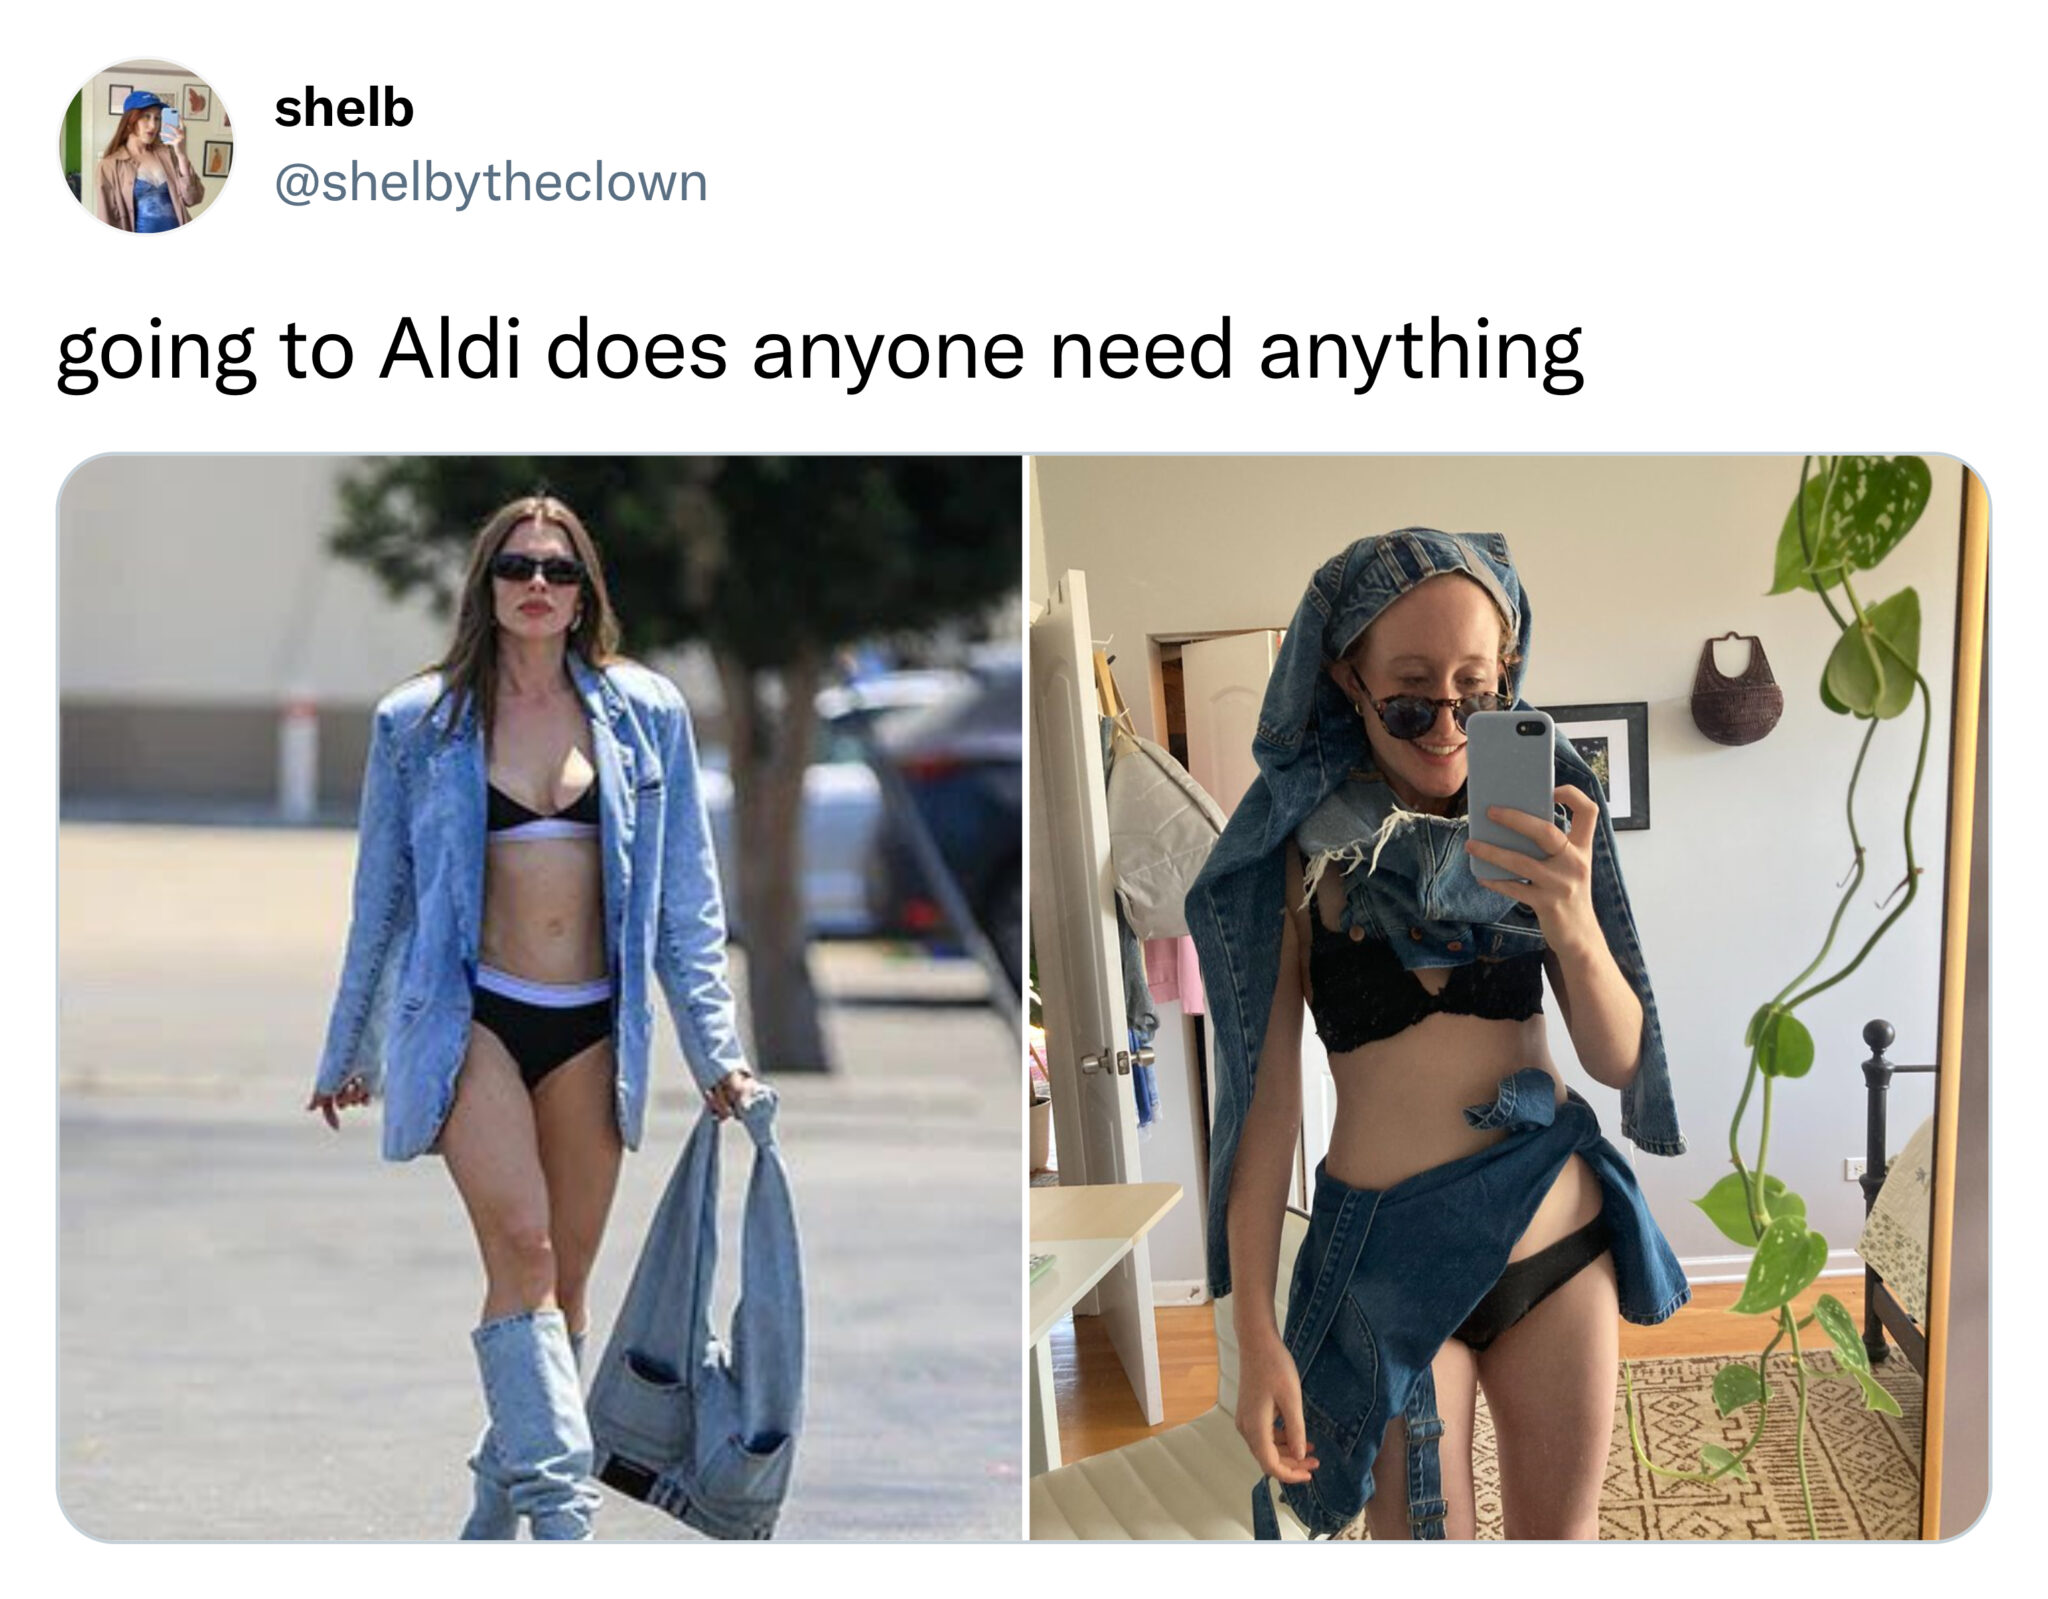 funny tweets and memes -  shoulder - shelb going to Aldi does anyone need anything